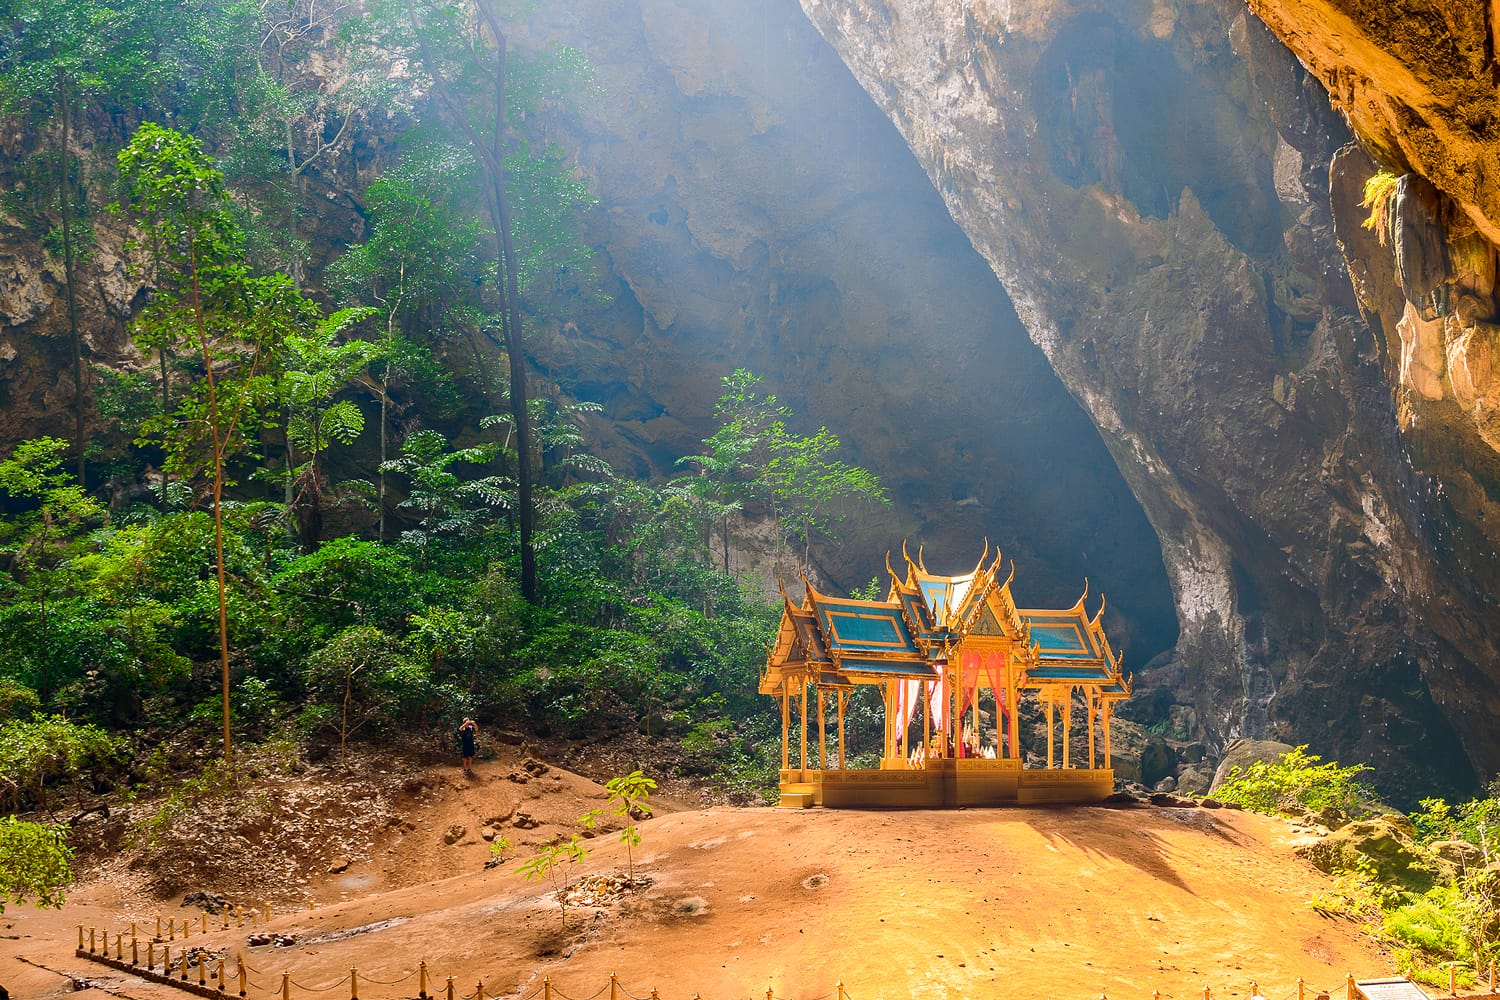 Phraya Nakhon Cave is the most popular attraction is a four-gabled pavilion constructed during the reign of King Rama its beauty and distinctive identity the pavilion at Prachuap Khiri Khan, Thailand.